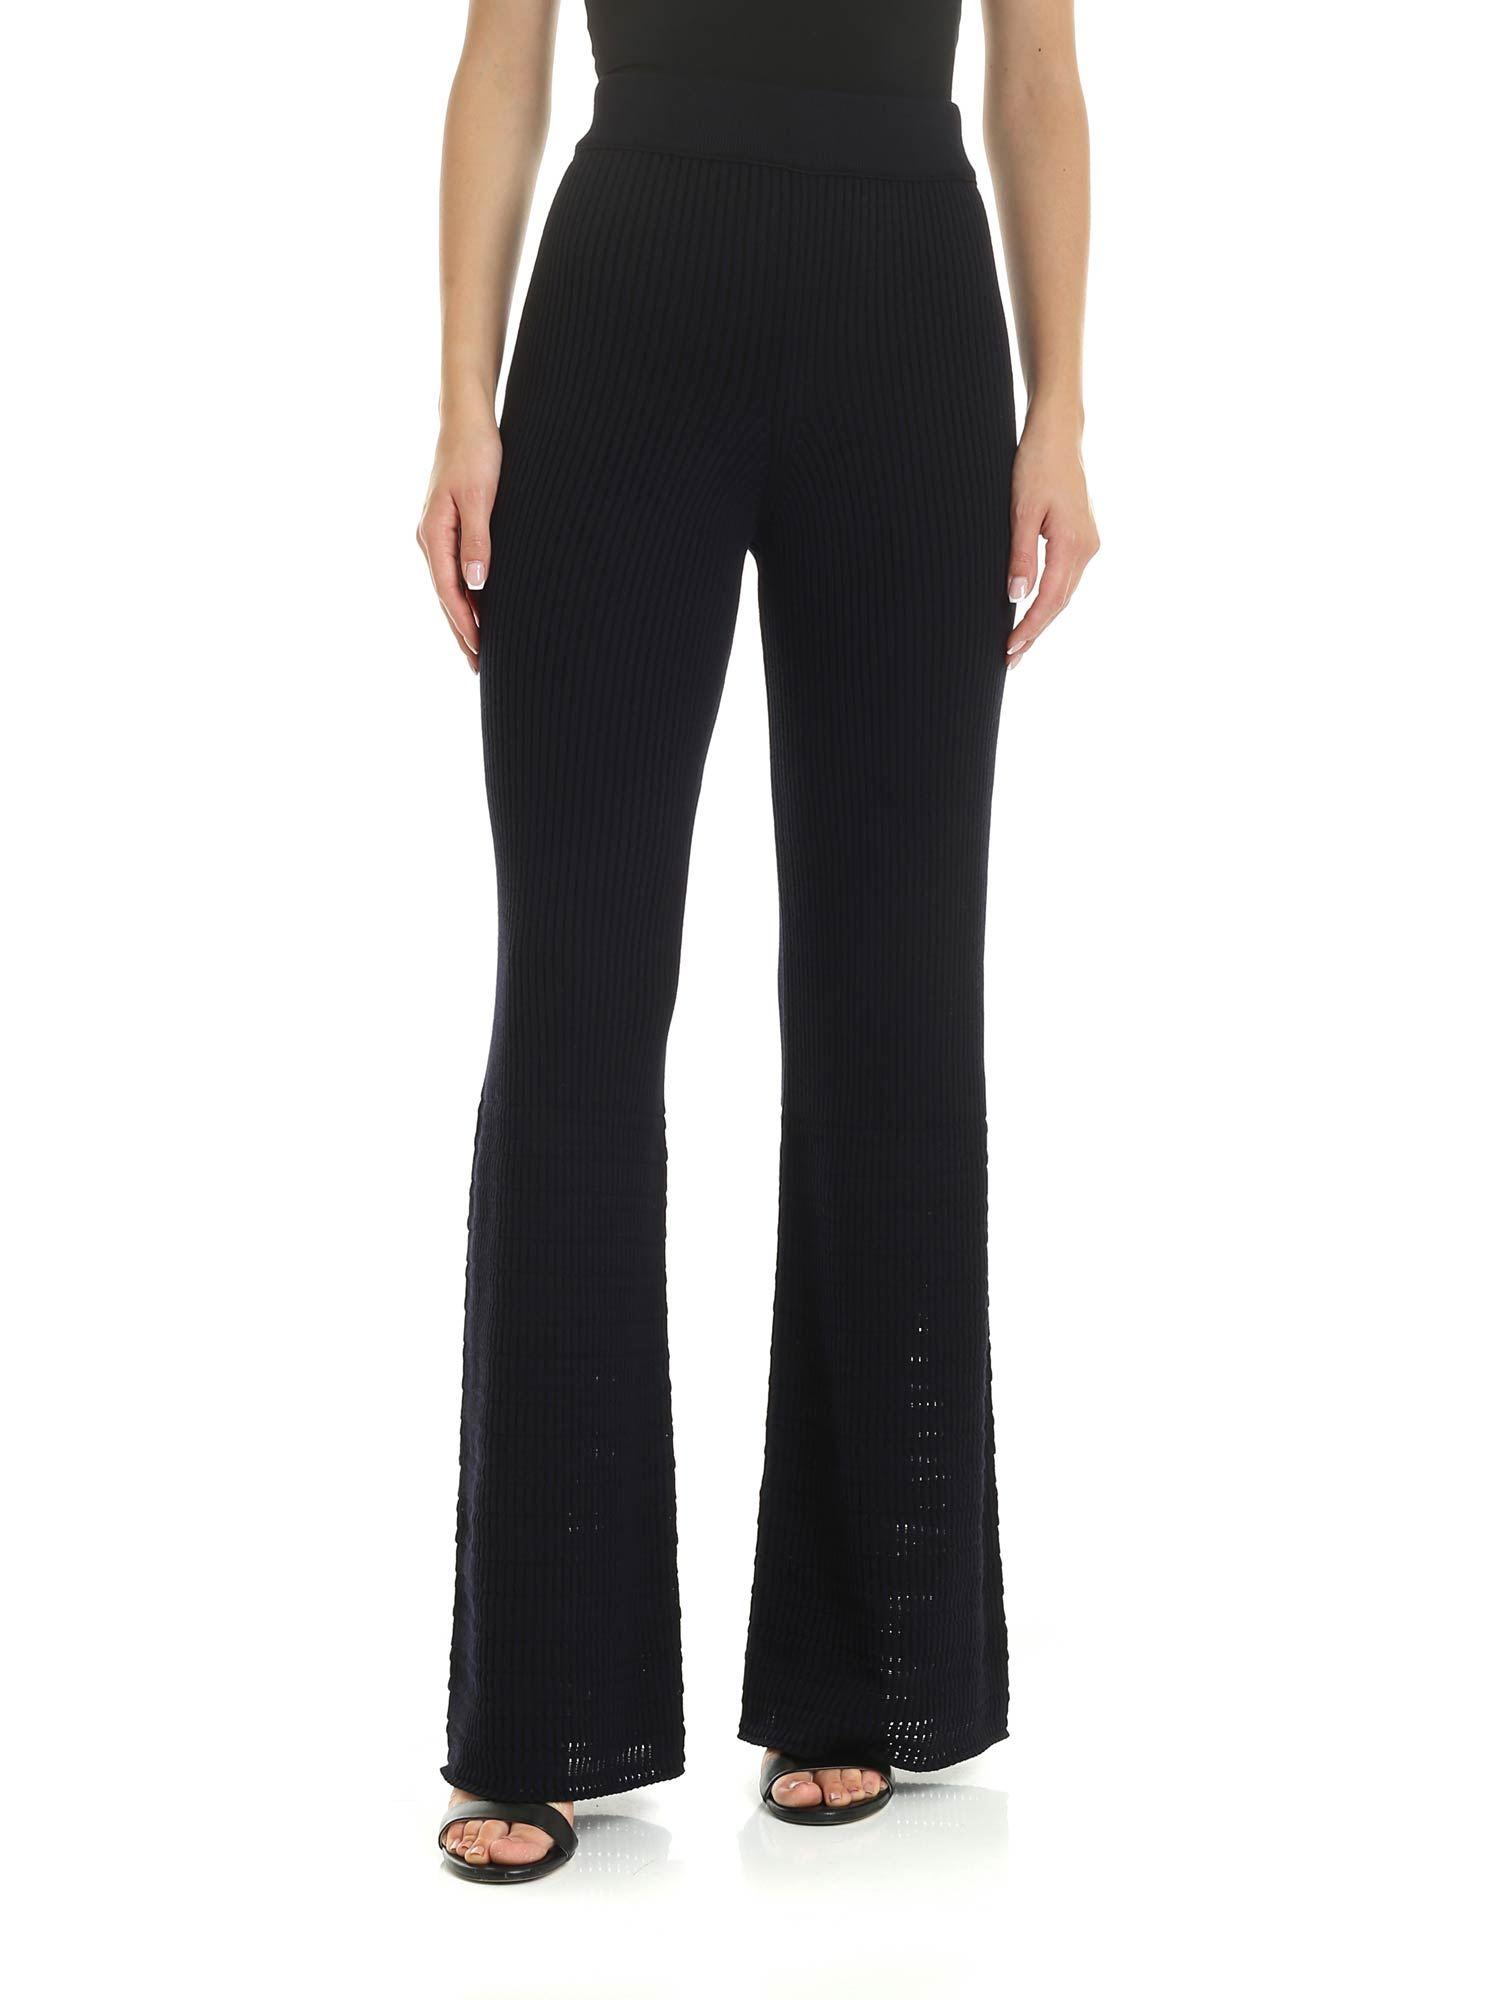 Golden Goose Deluxe Brand Cotton Shizuko Trousers In Navy Blue - Lyst